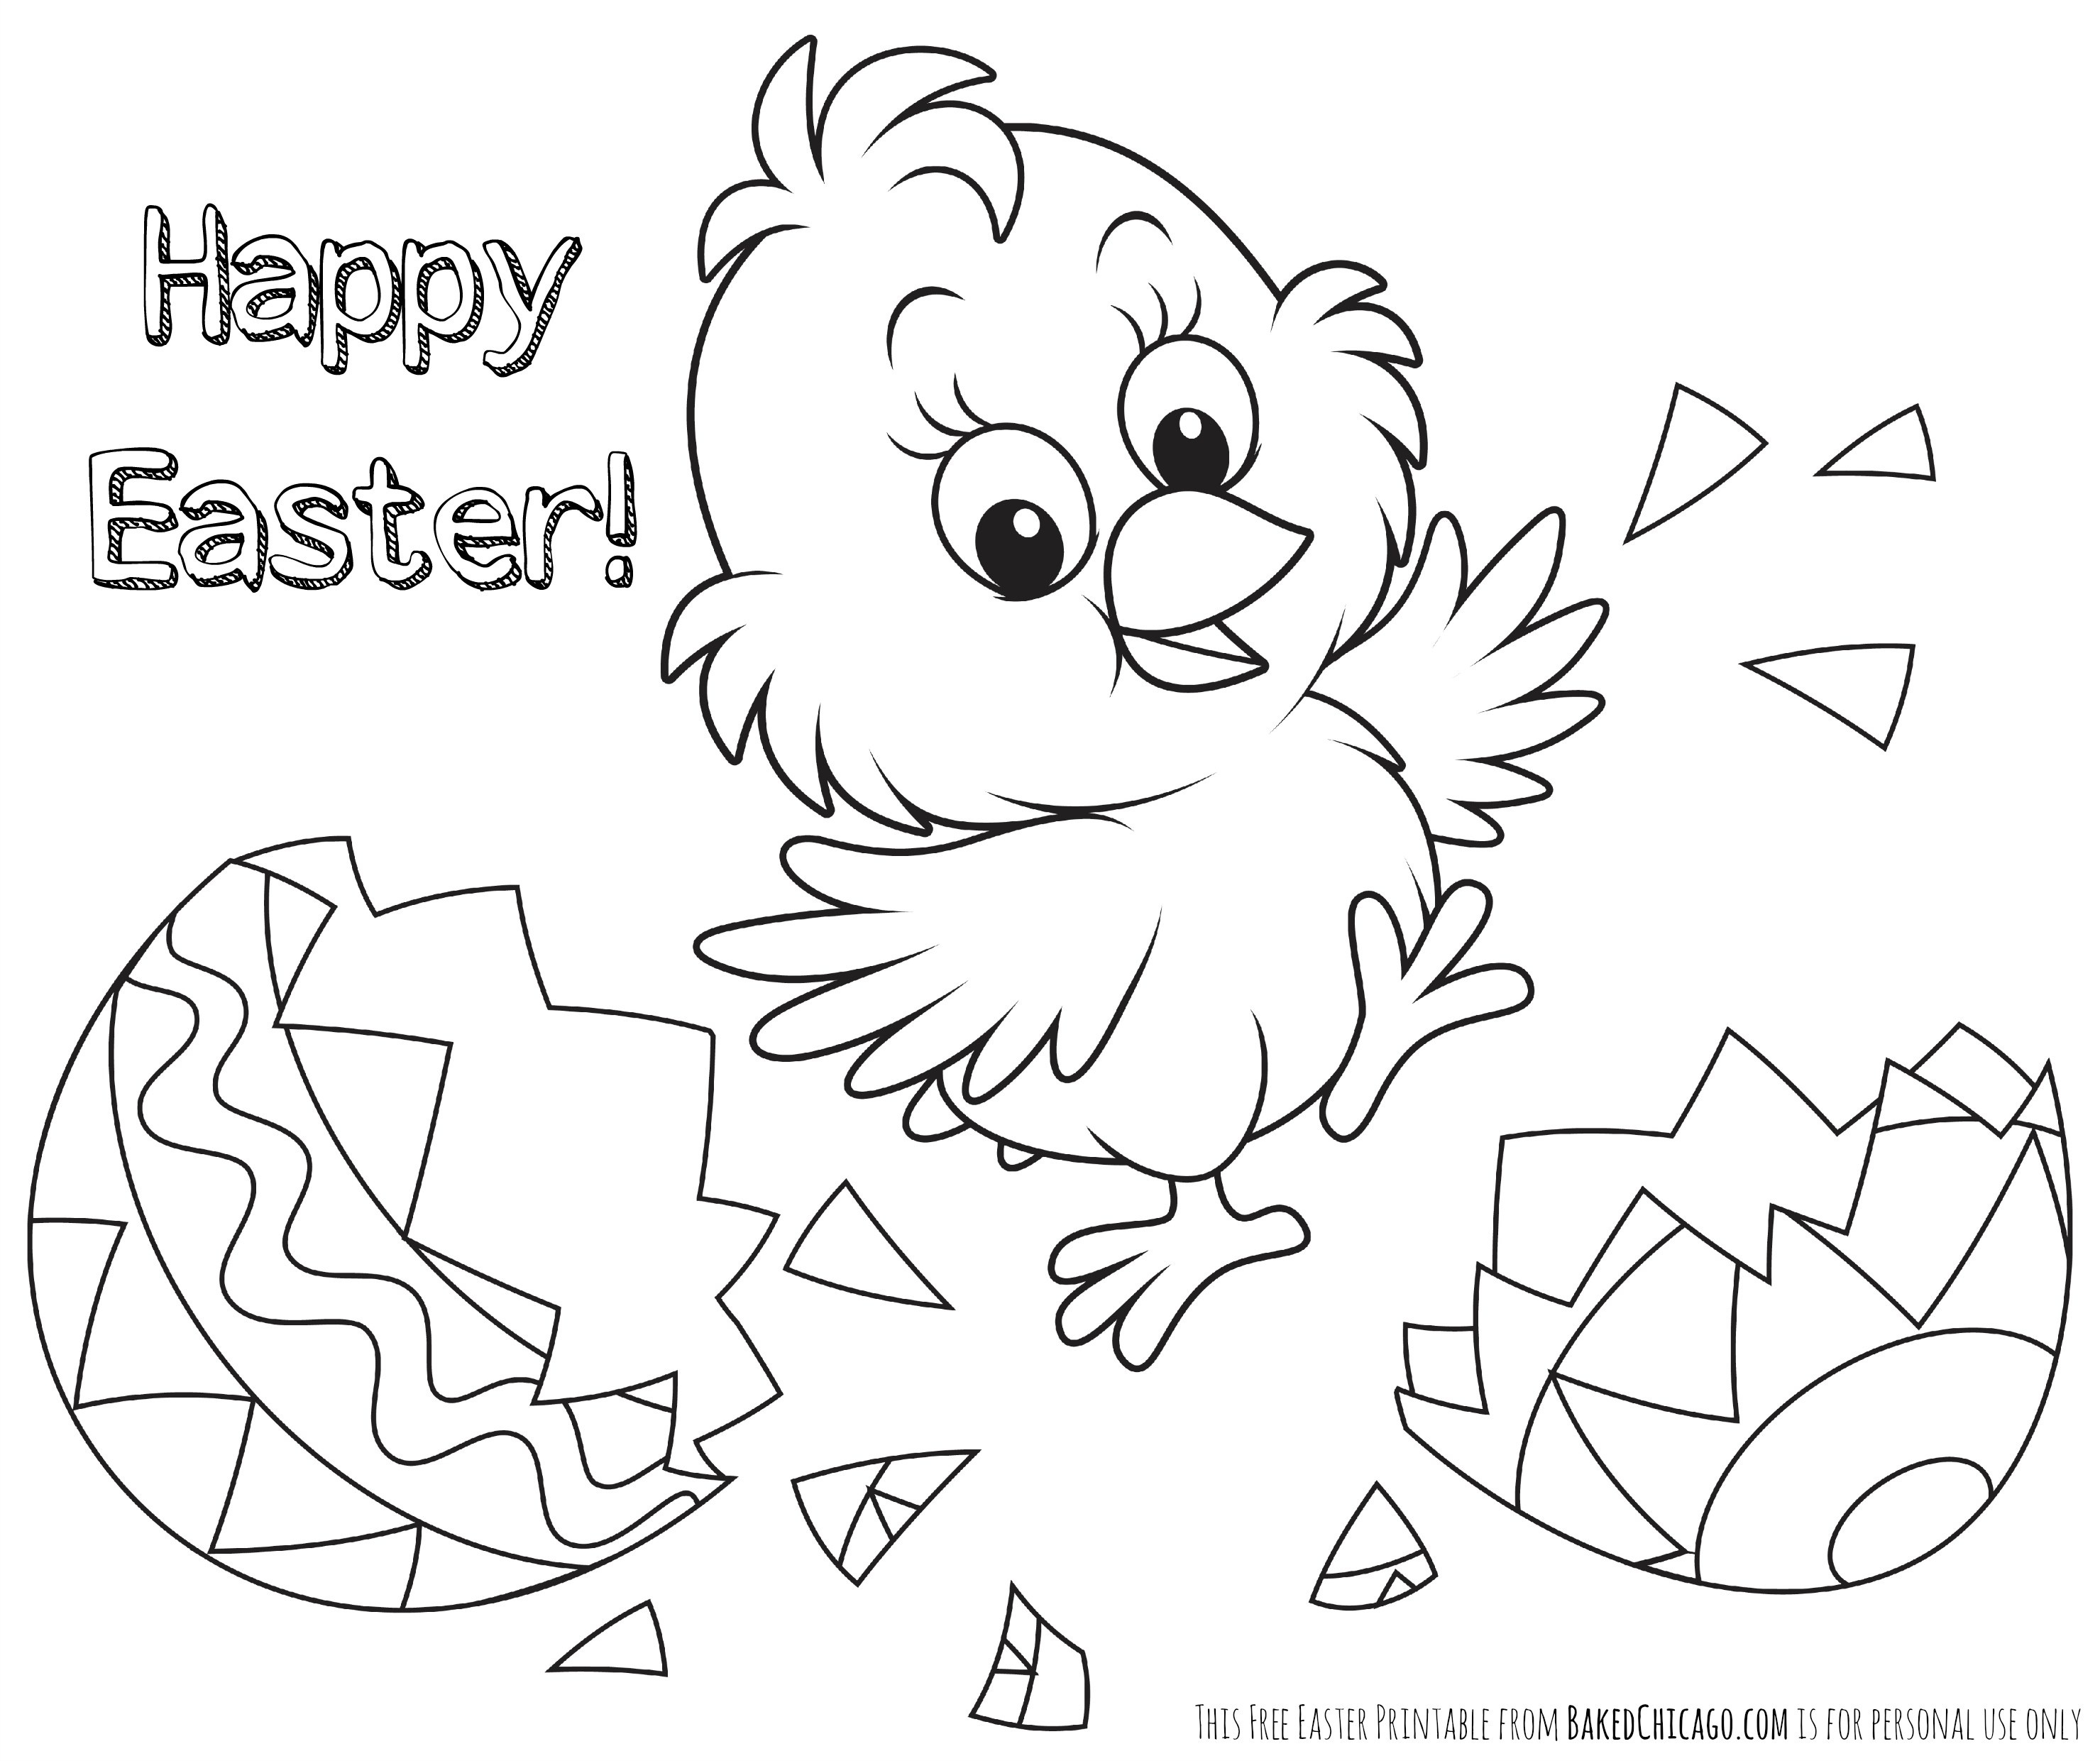 Coloring Page ~ Printable Easter Coloring Pages Unique Gallery Of - Free Printable Easter Coloring Pages For Toddlers